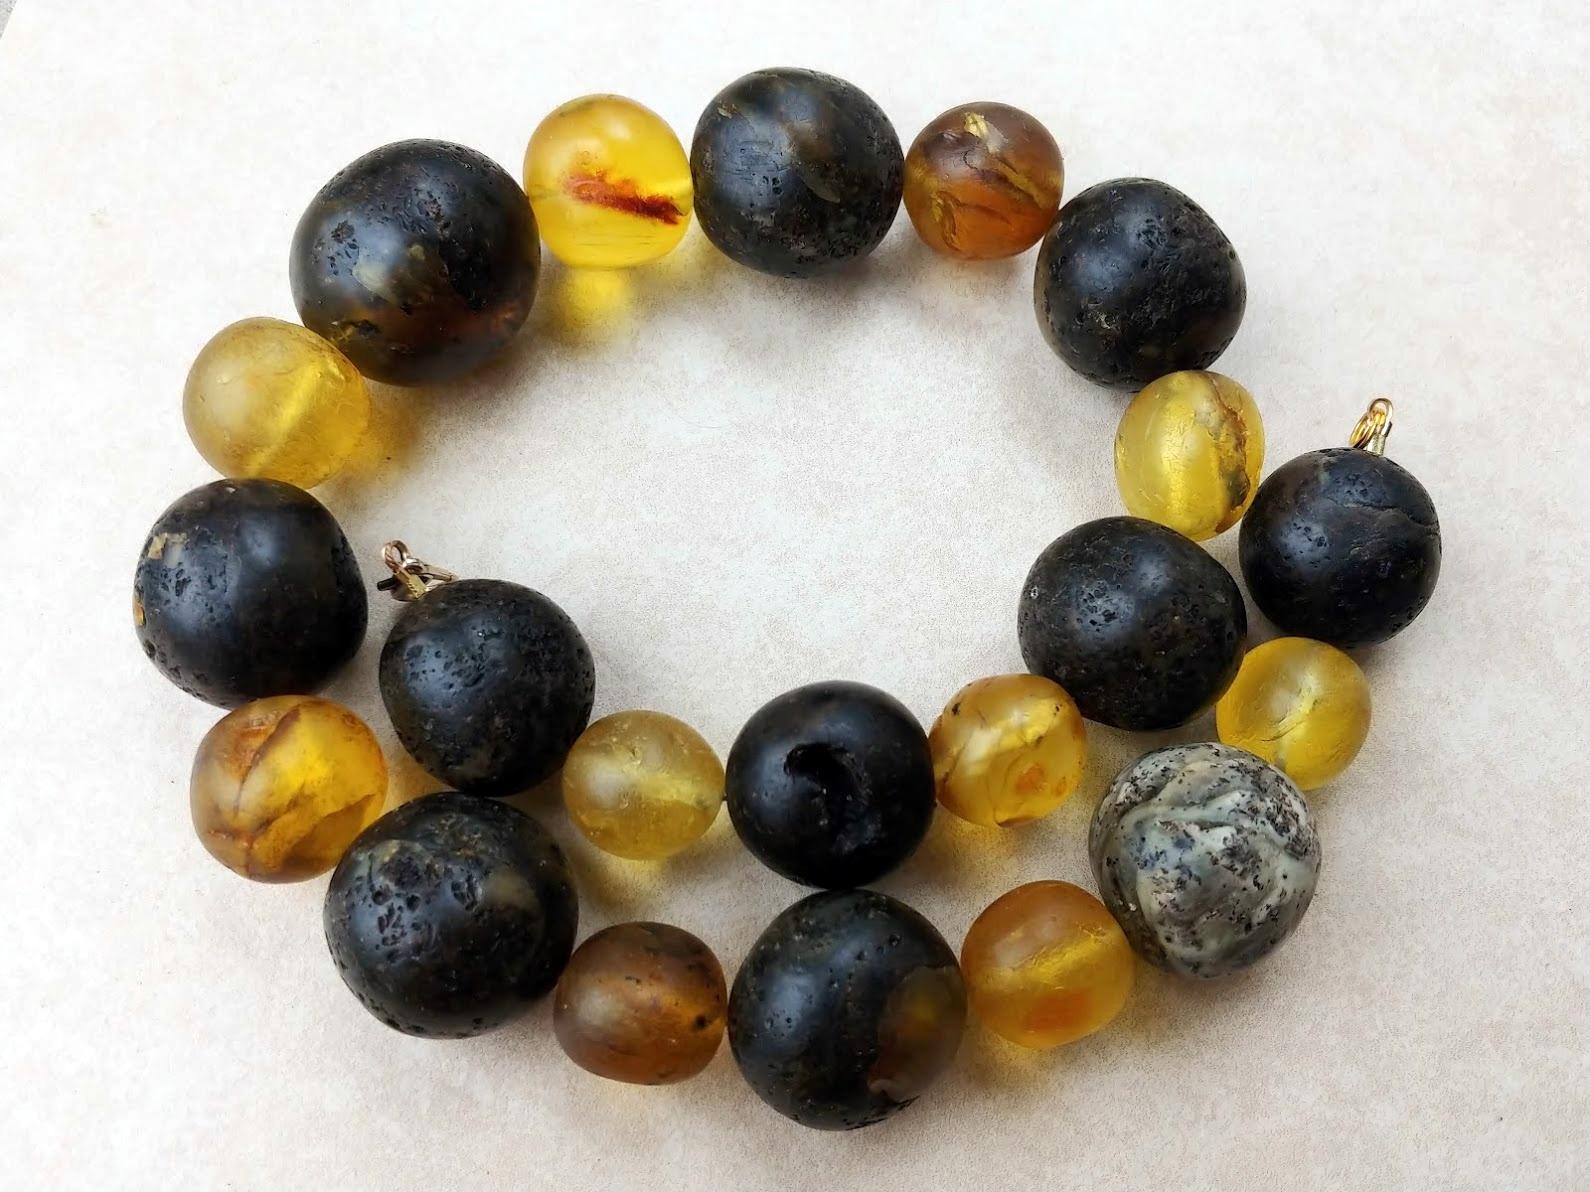 A genuine, ancient Baltic amber necklace weighing 229 grams, approx. 1900s. The diameter of the largest bead is approx. 36mm. The diameter of the smallest bead is approx. 21mm. All beads were cut by hand, so they are not ideally round. They are not